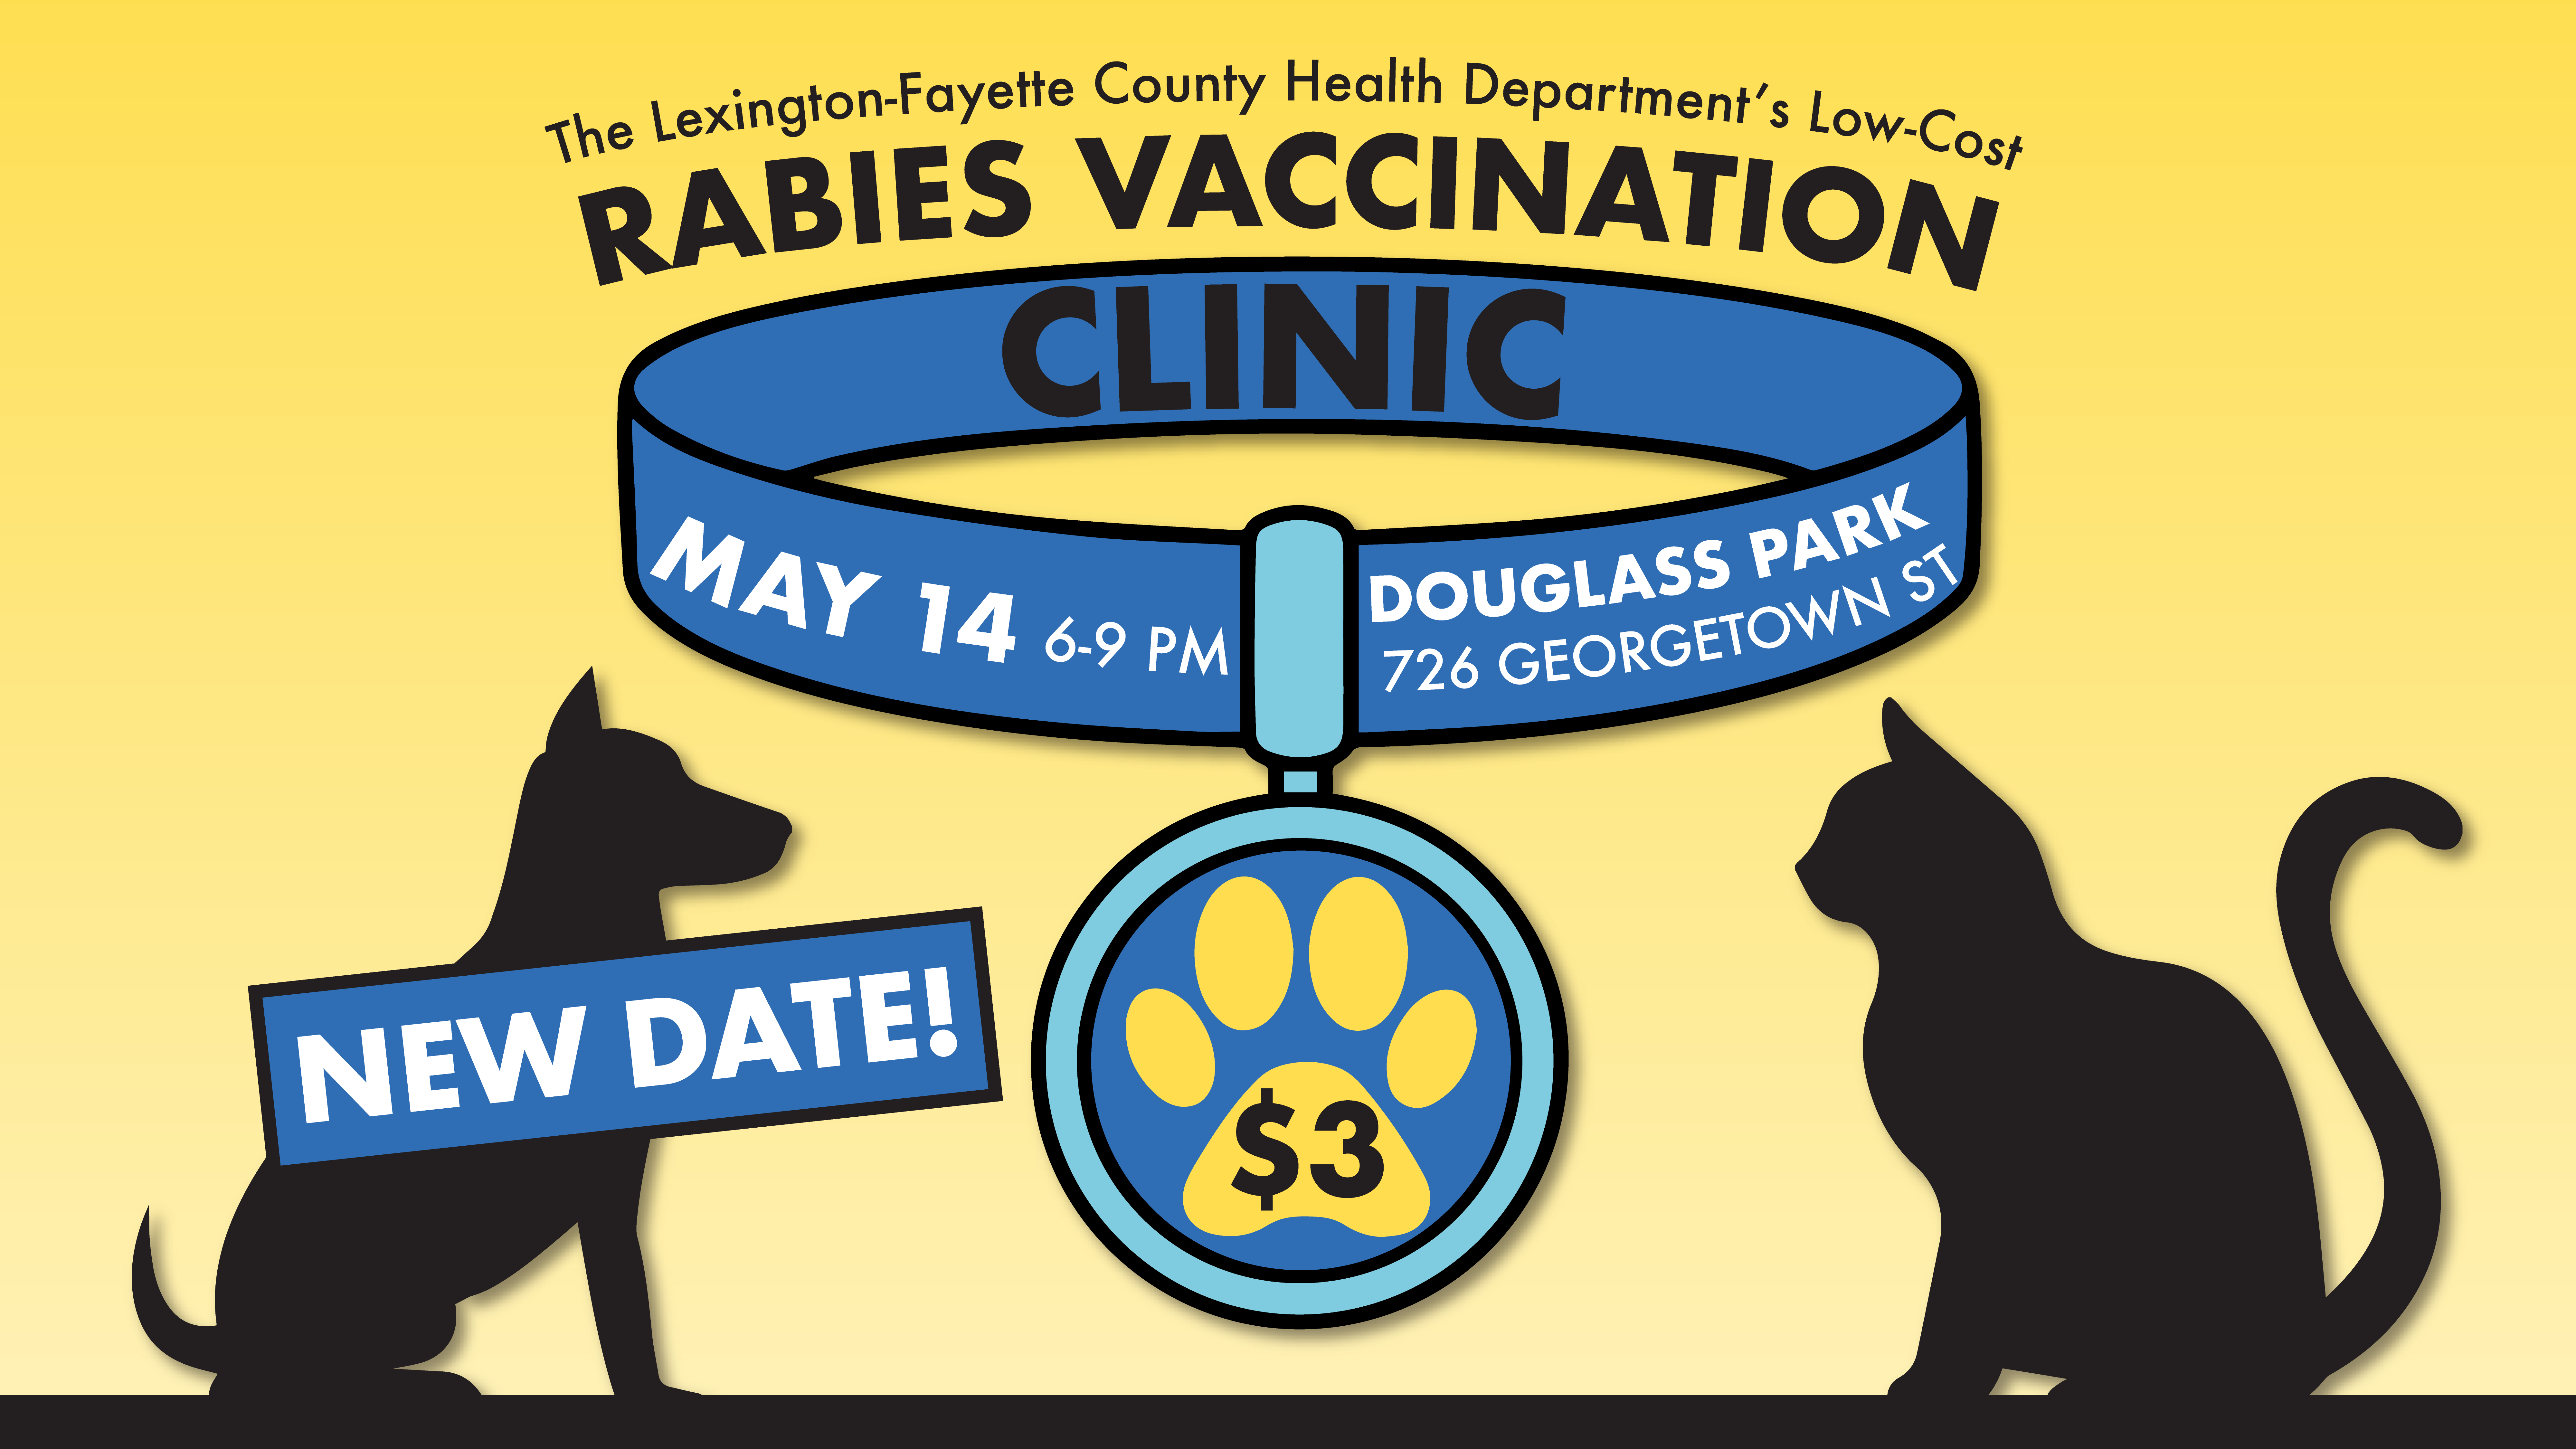 NEW DATE: Rabies clinic moves to May 14 at Douglass Park